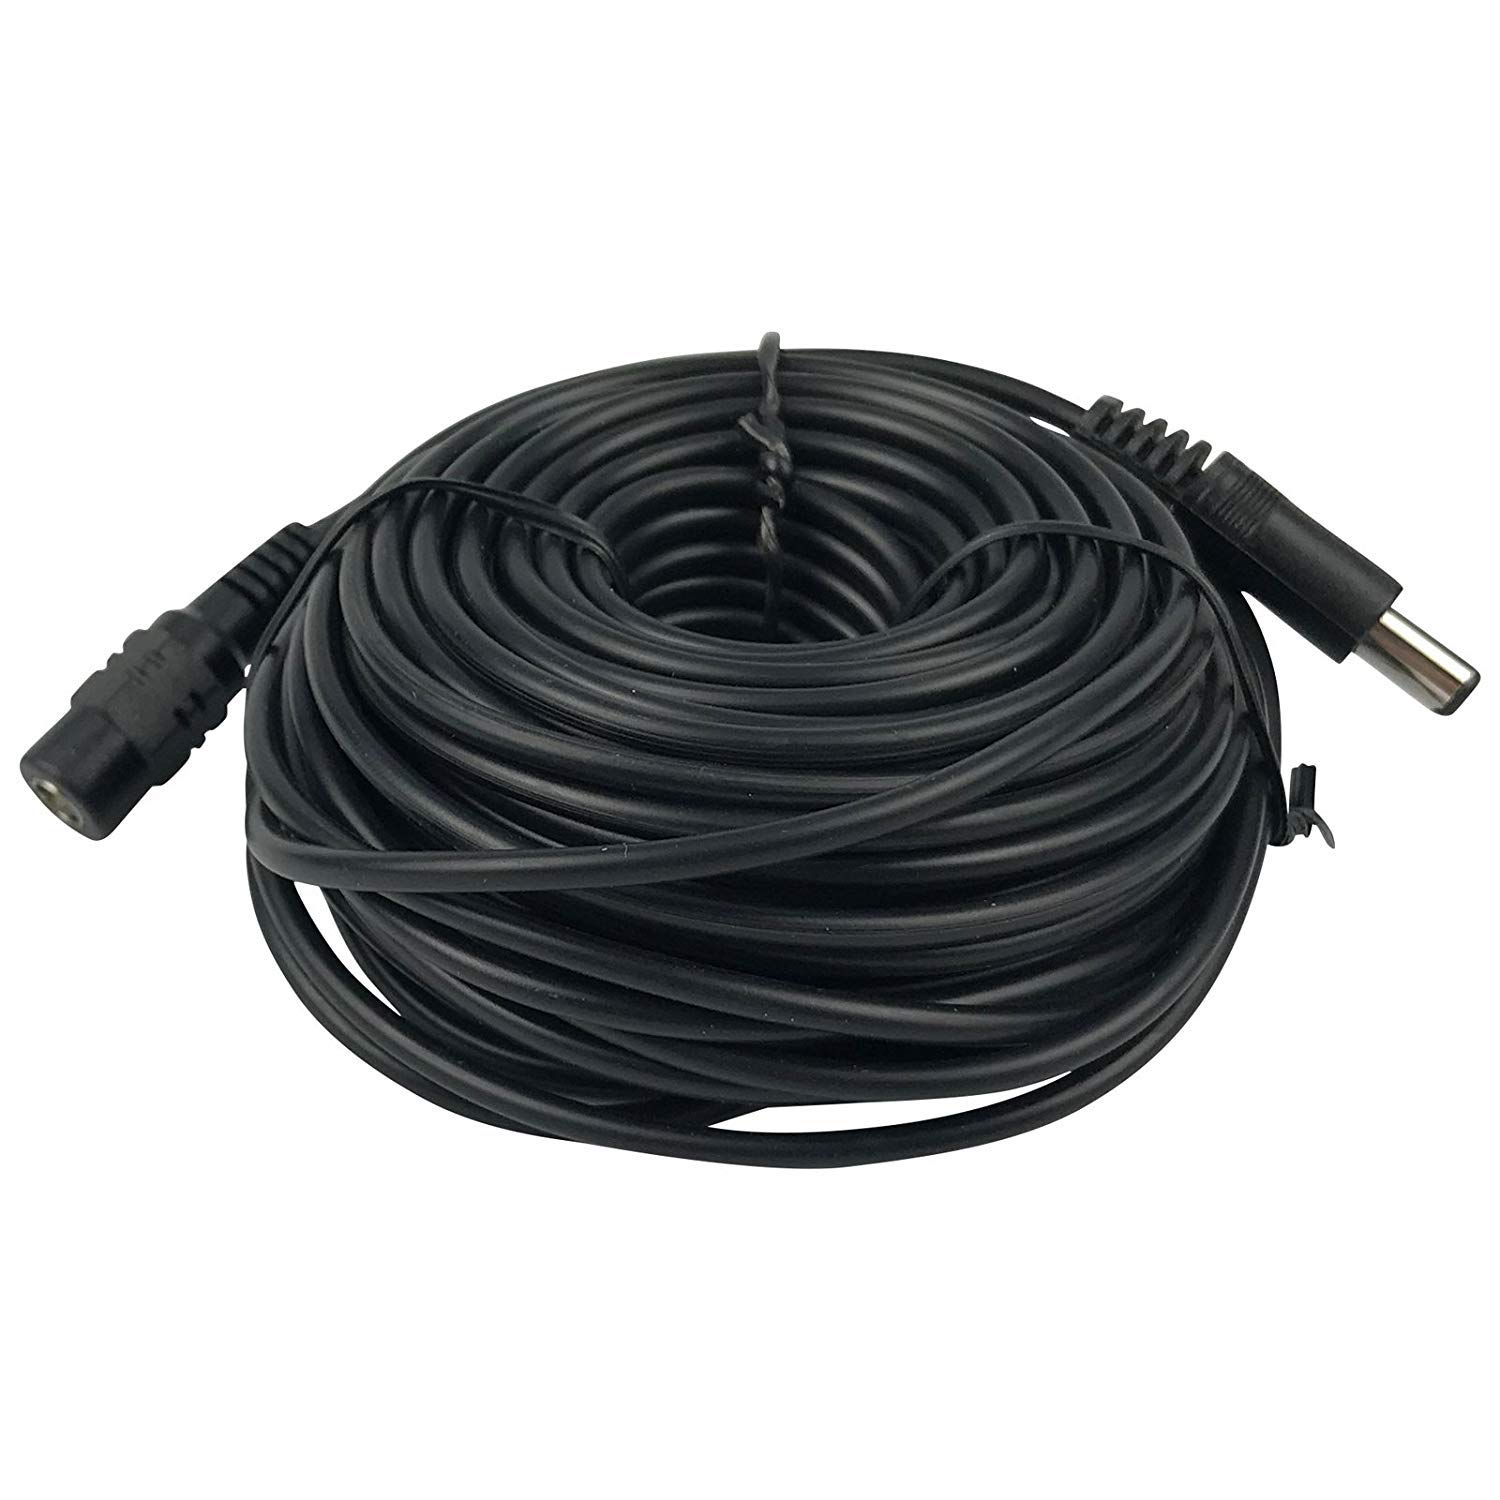 CCTV 15m 2.1x5.5mm Dc 12v Power Extension Cable